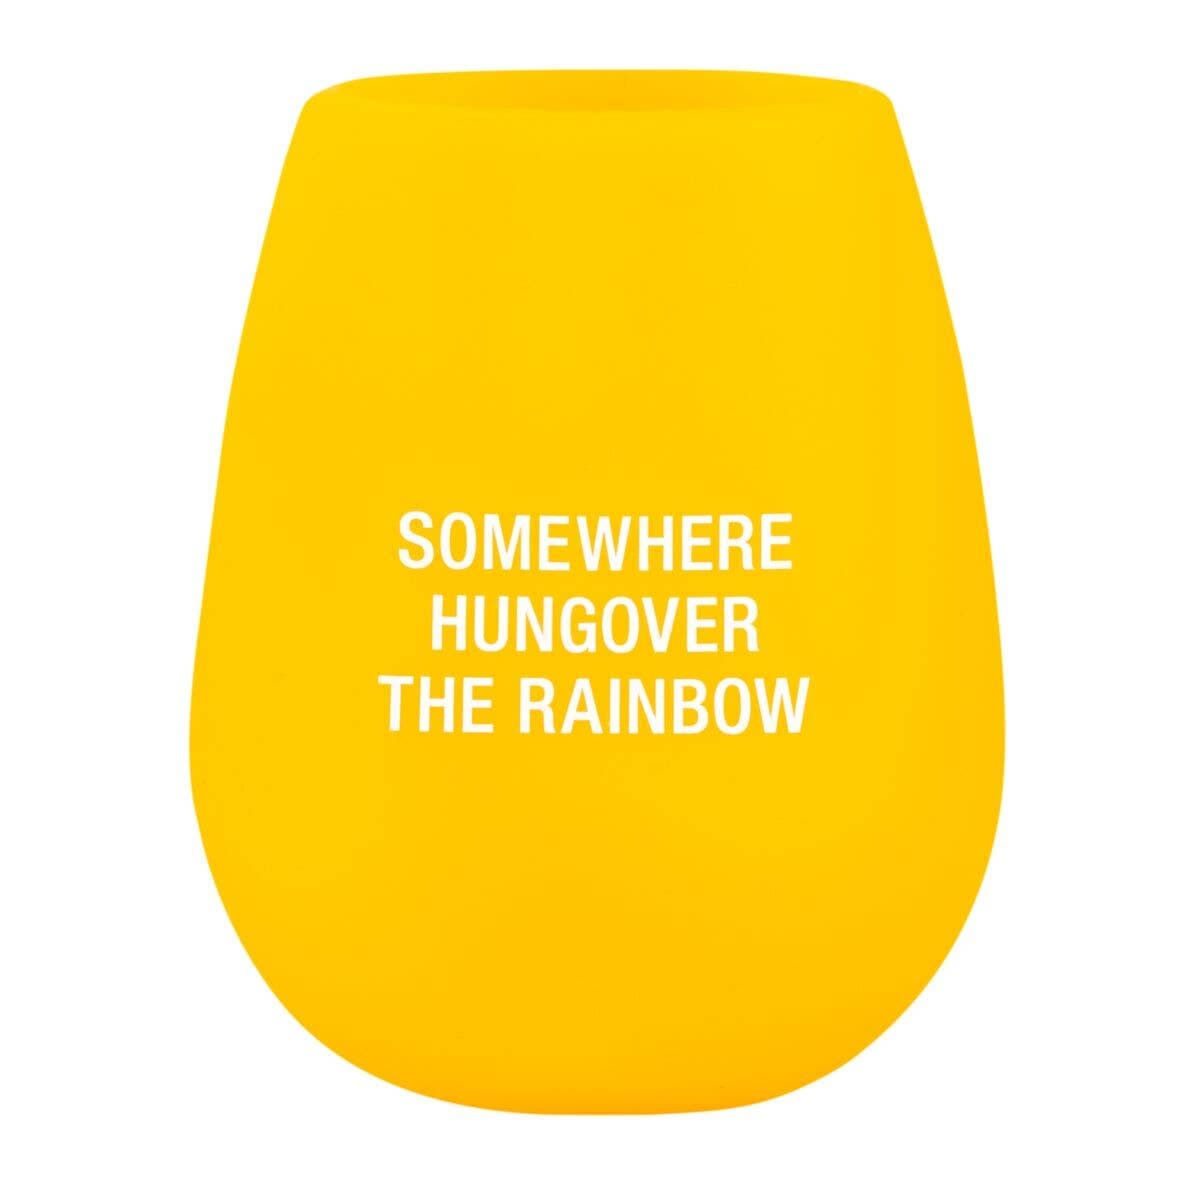 About Face Designs WINE GLASS - HUNGOVER THE RAINBOW